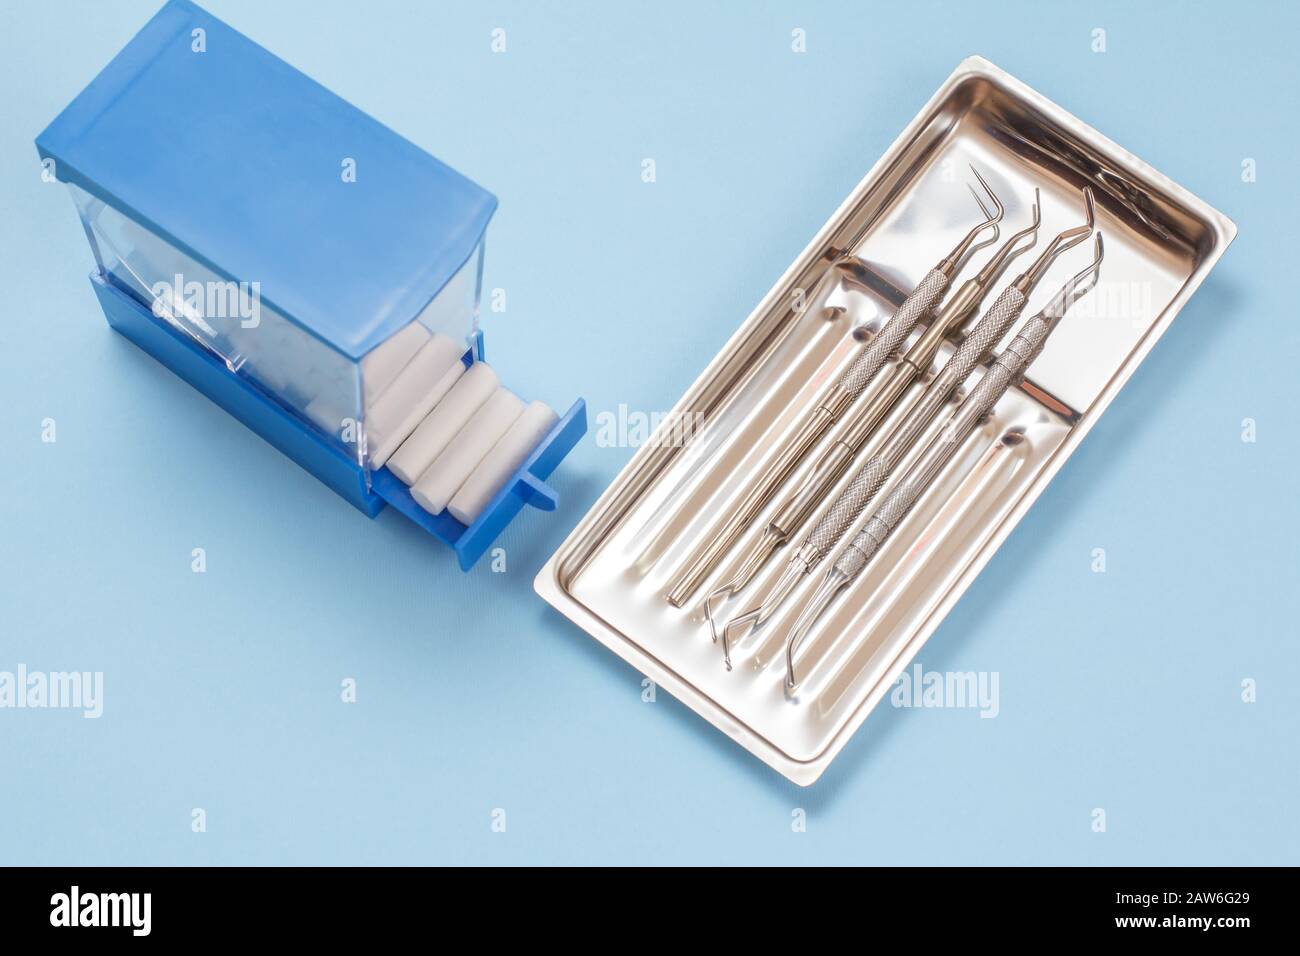 Set of composite filling instruments for dental treatment and plastic box with cotton tampons. Medical tools in stainless steel tray. Stock Photo